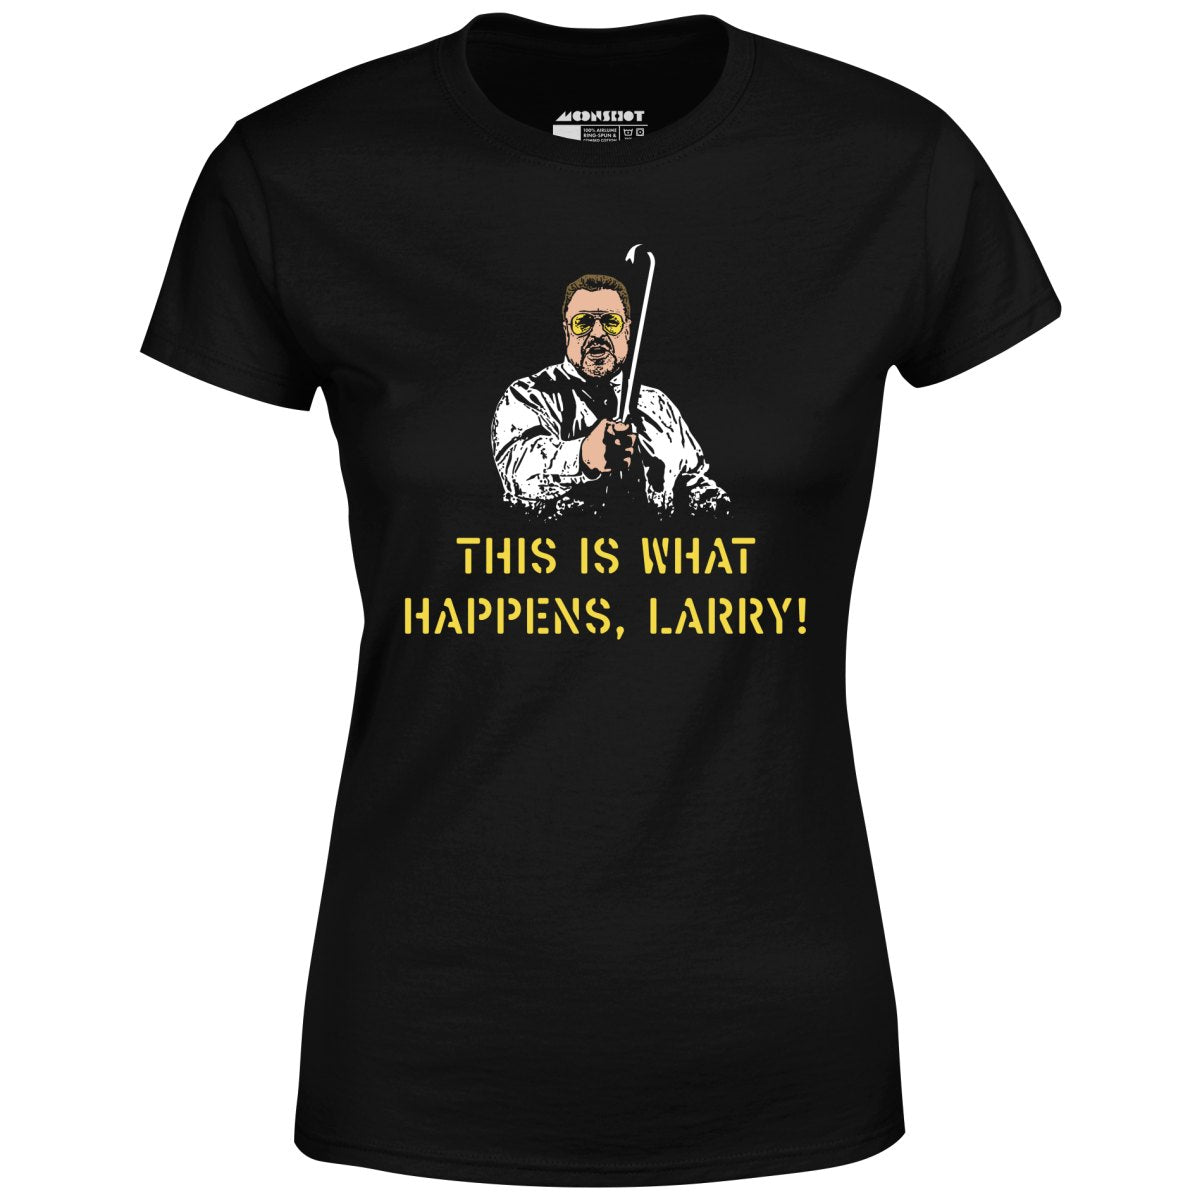 This is What Happens, Larry - Women's T-Shirt